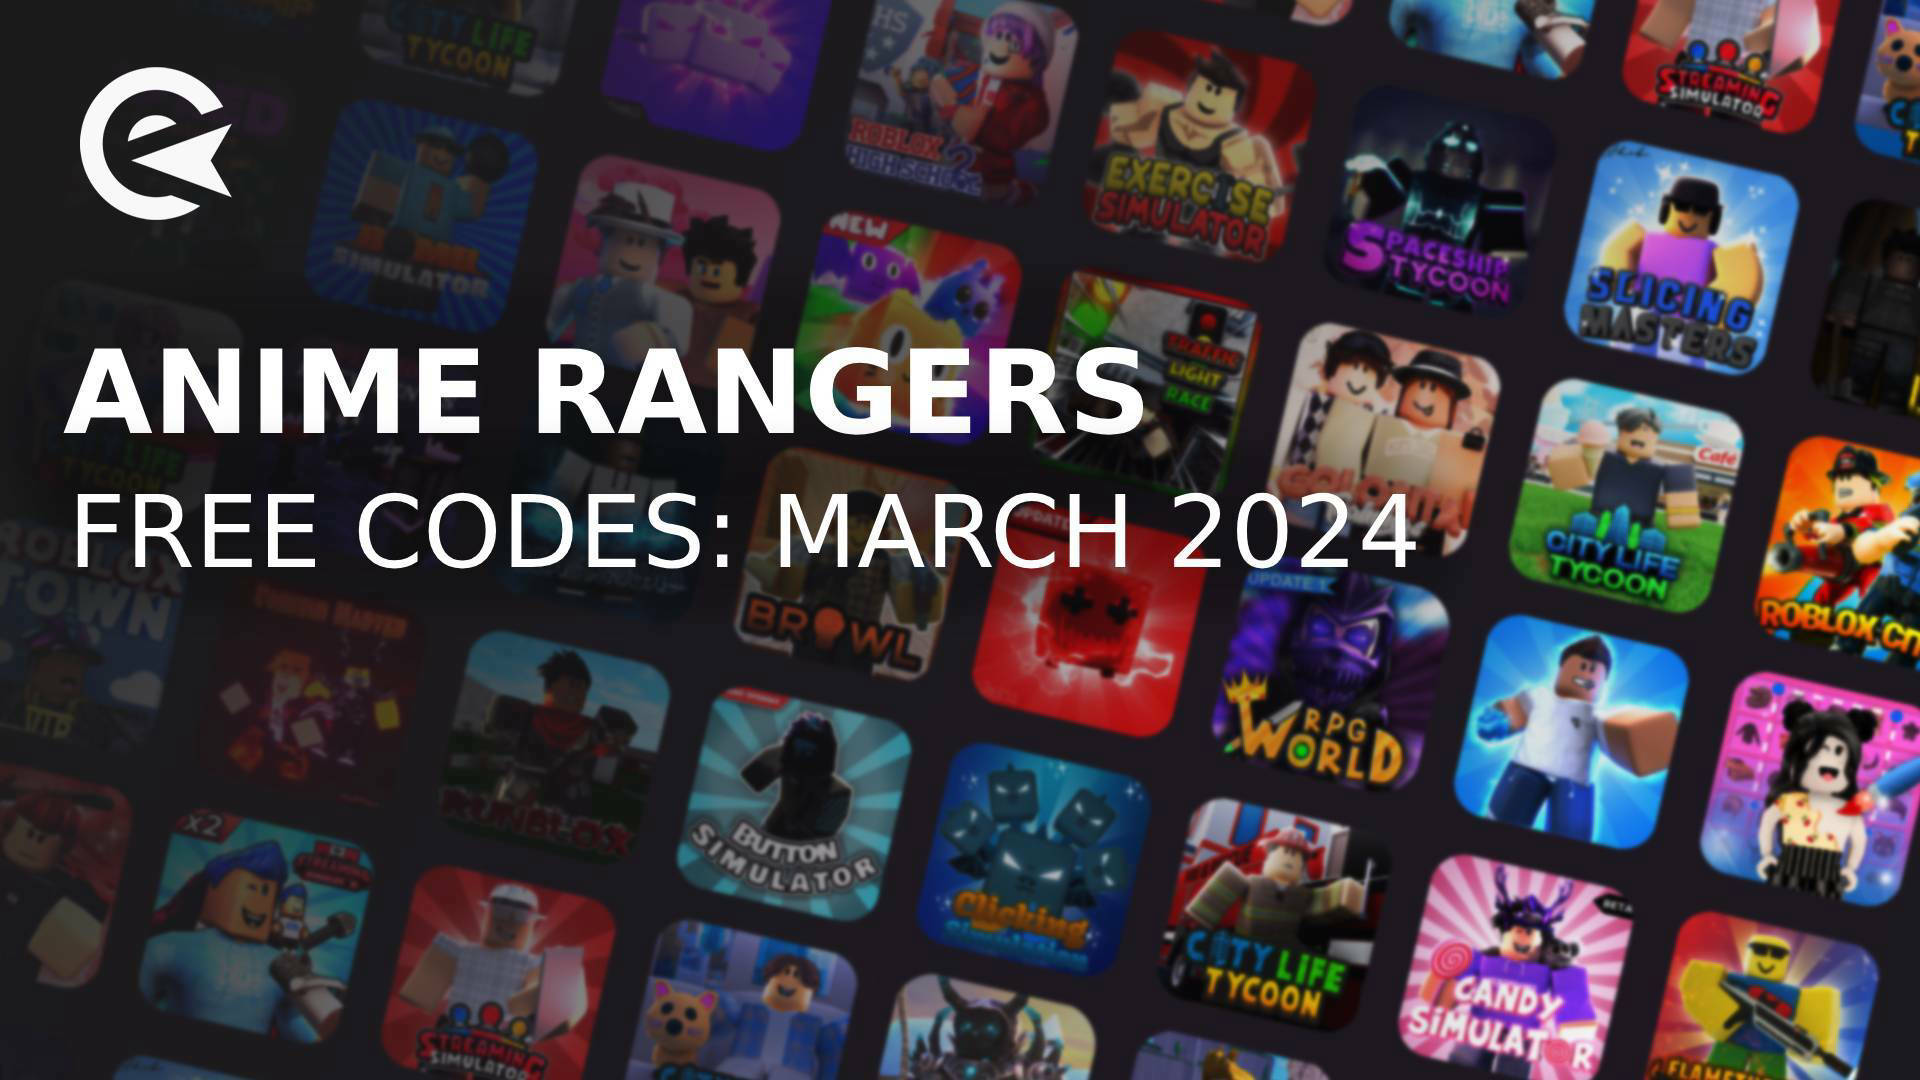 Anime Rangers Codes (March 2024)